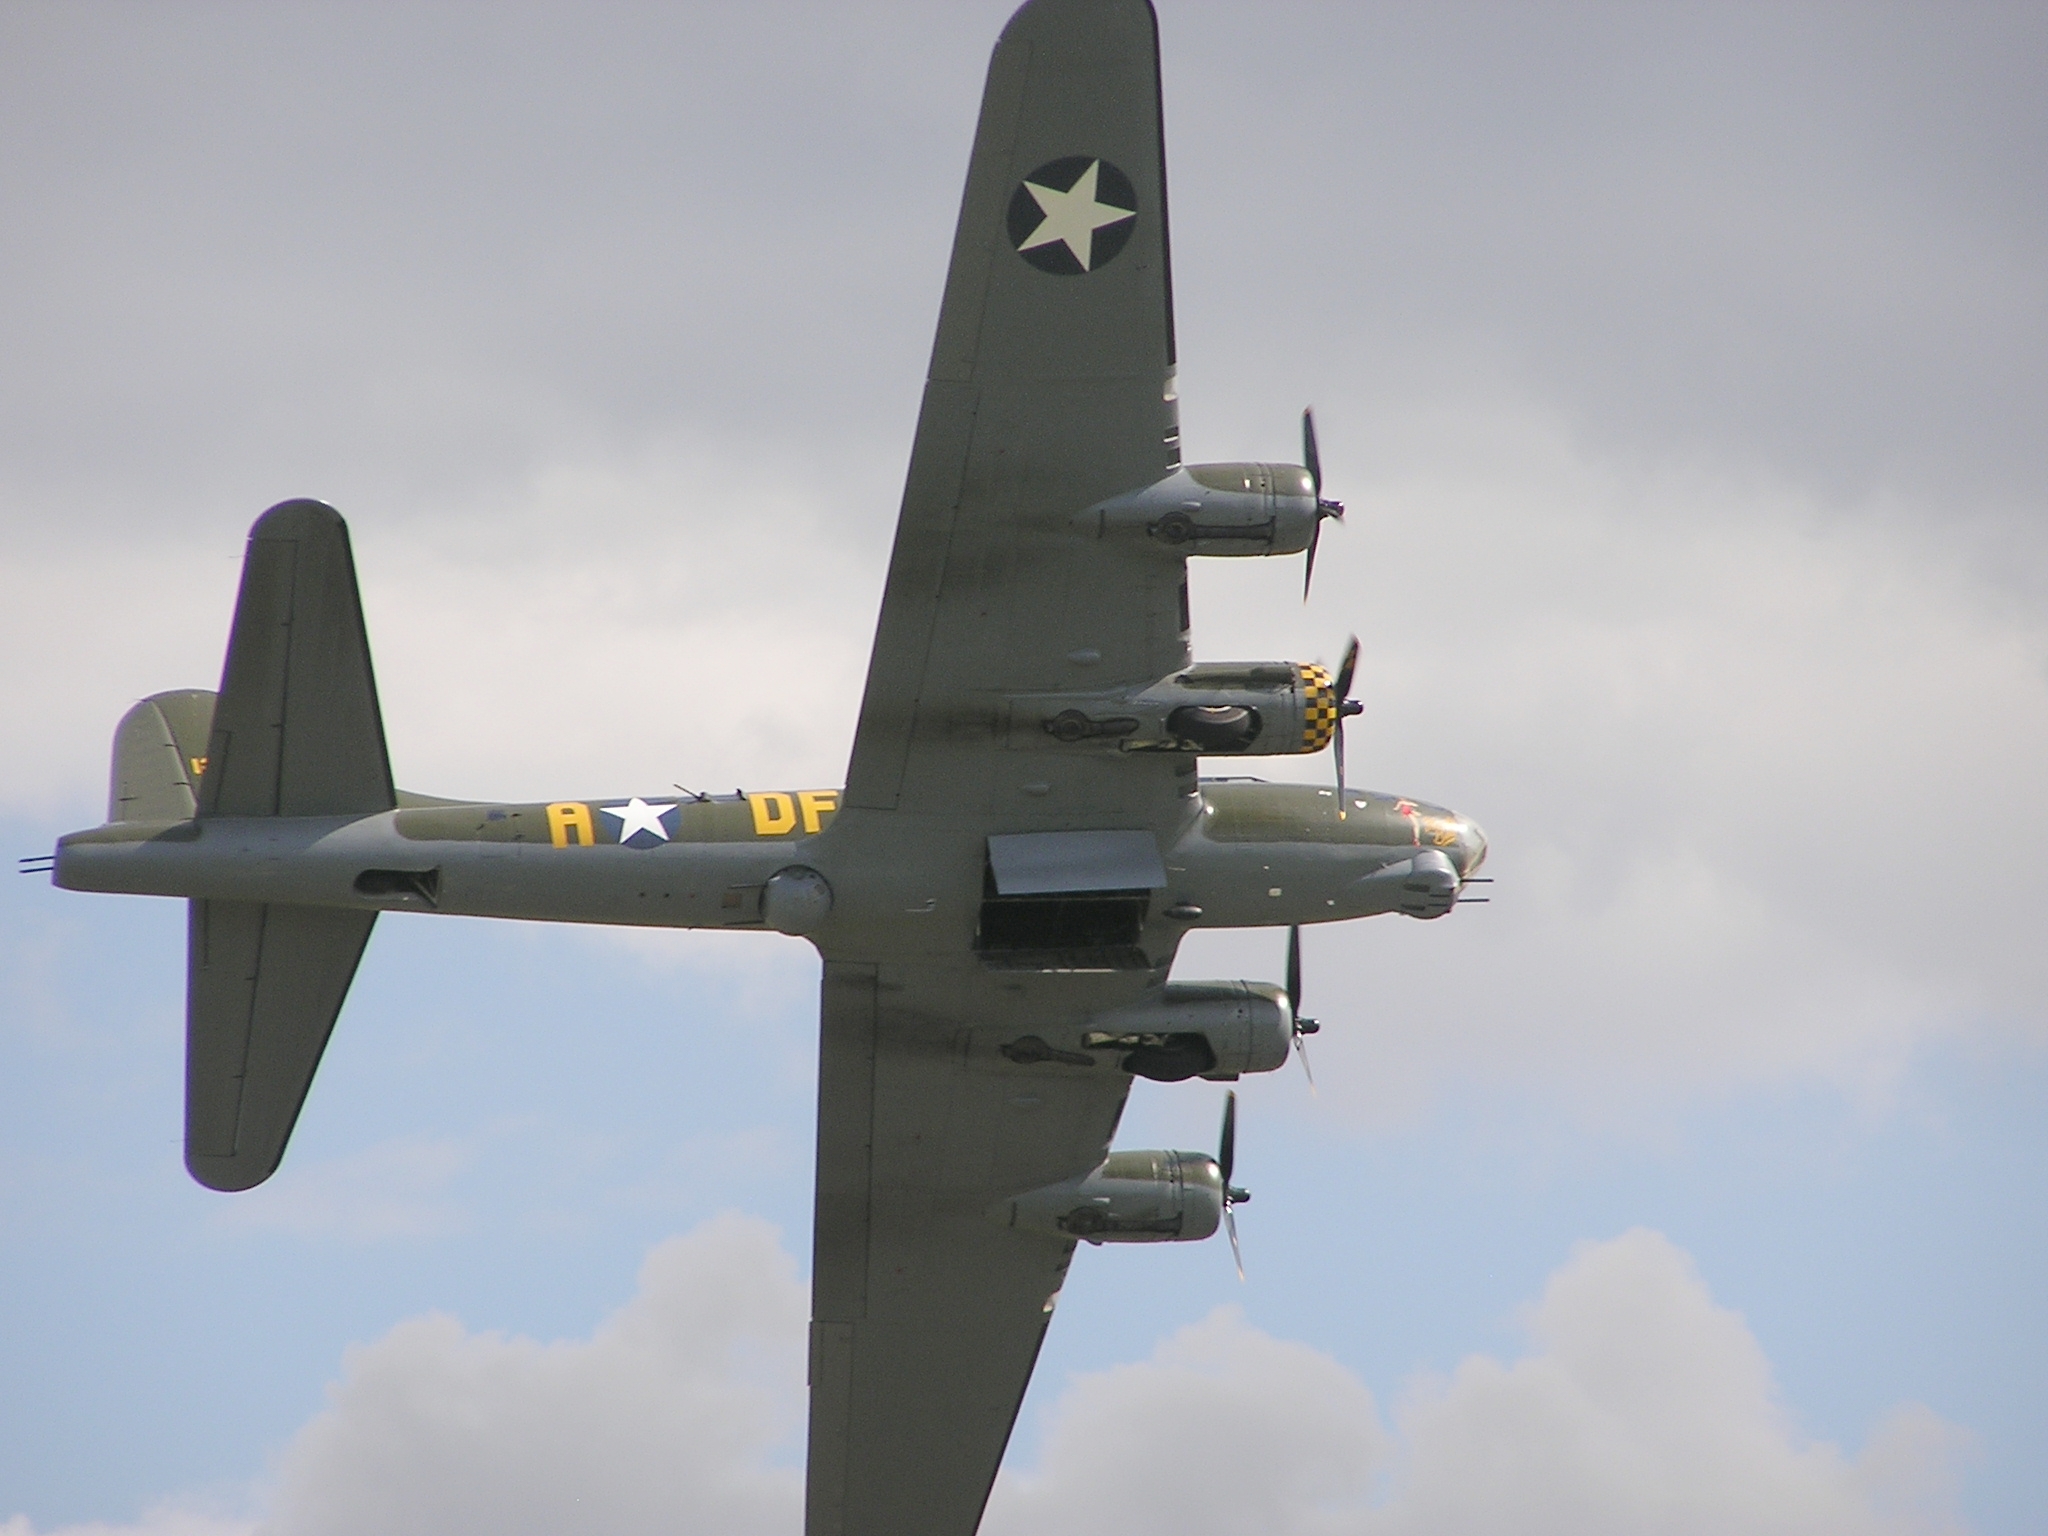 B-17G Flying Fortress bomber 'Sally B' during an air show at Duxford, England, United Kingdom, 8 Jul 2007